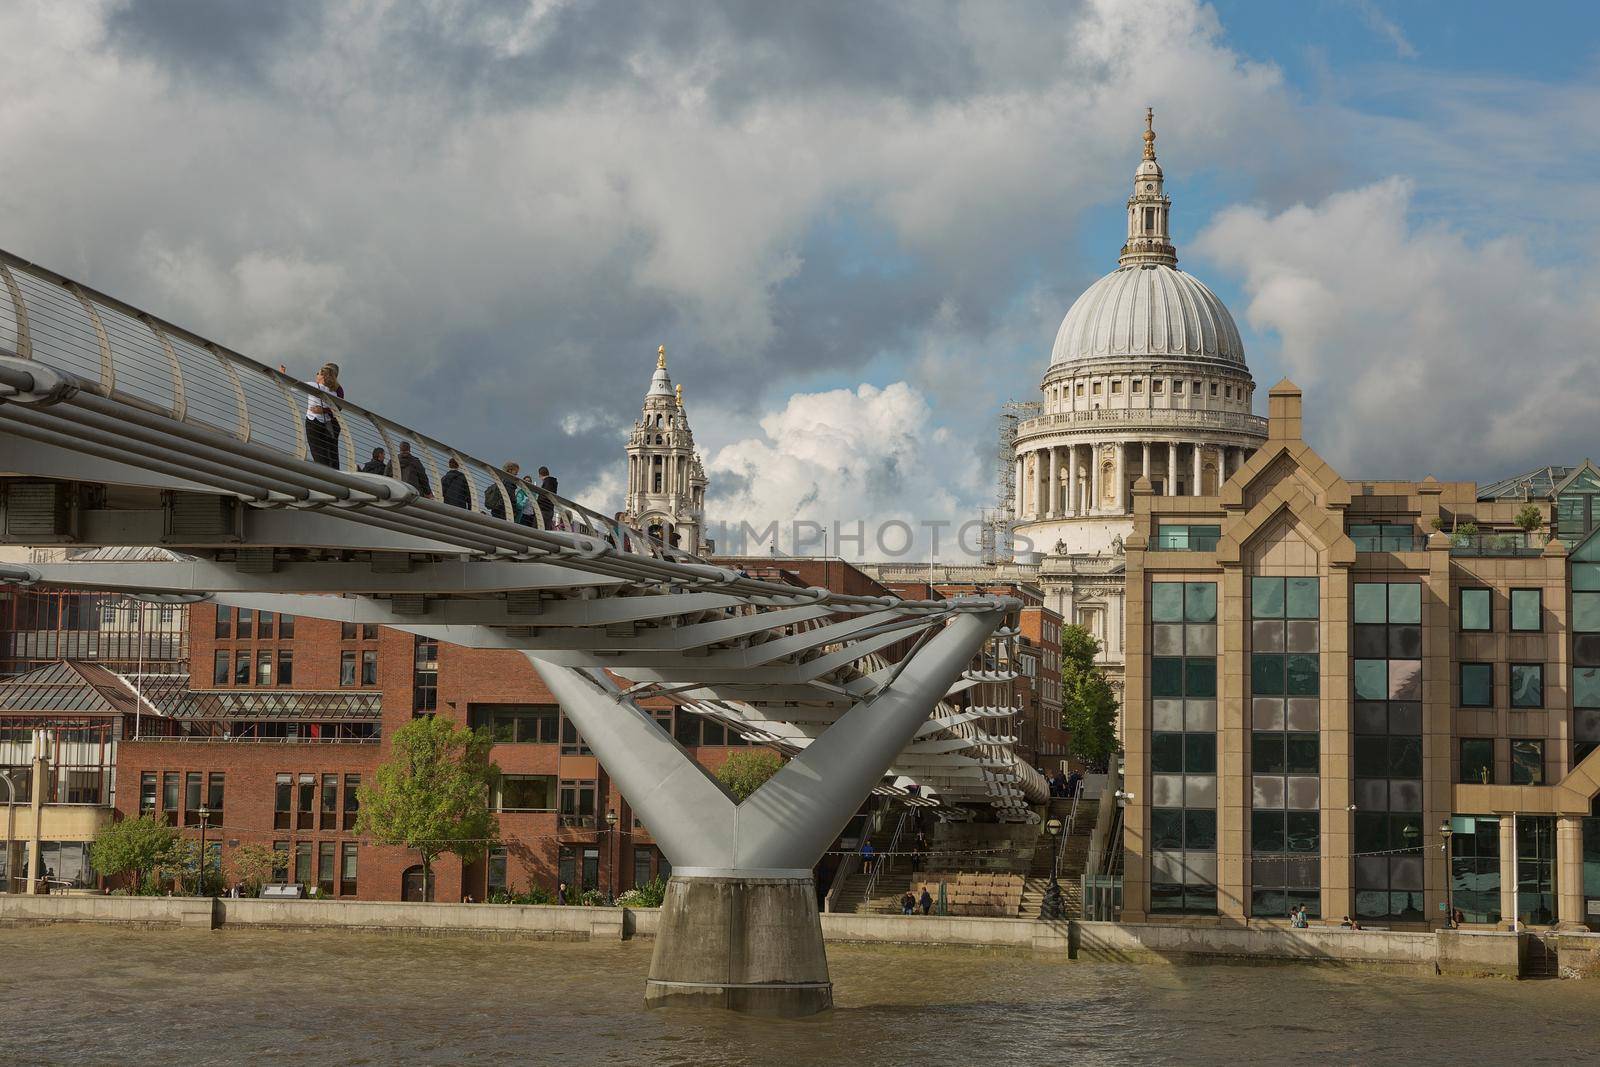 LONDON, UK - SEPTEMBER 08, 2017: St Pauls Cathedral and the Millennium Bridge in London, United Kingdom during a cloudy day.